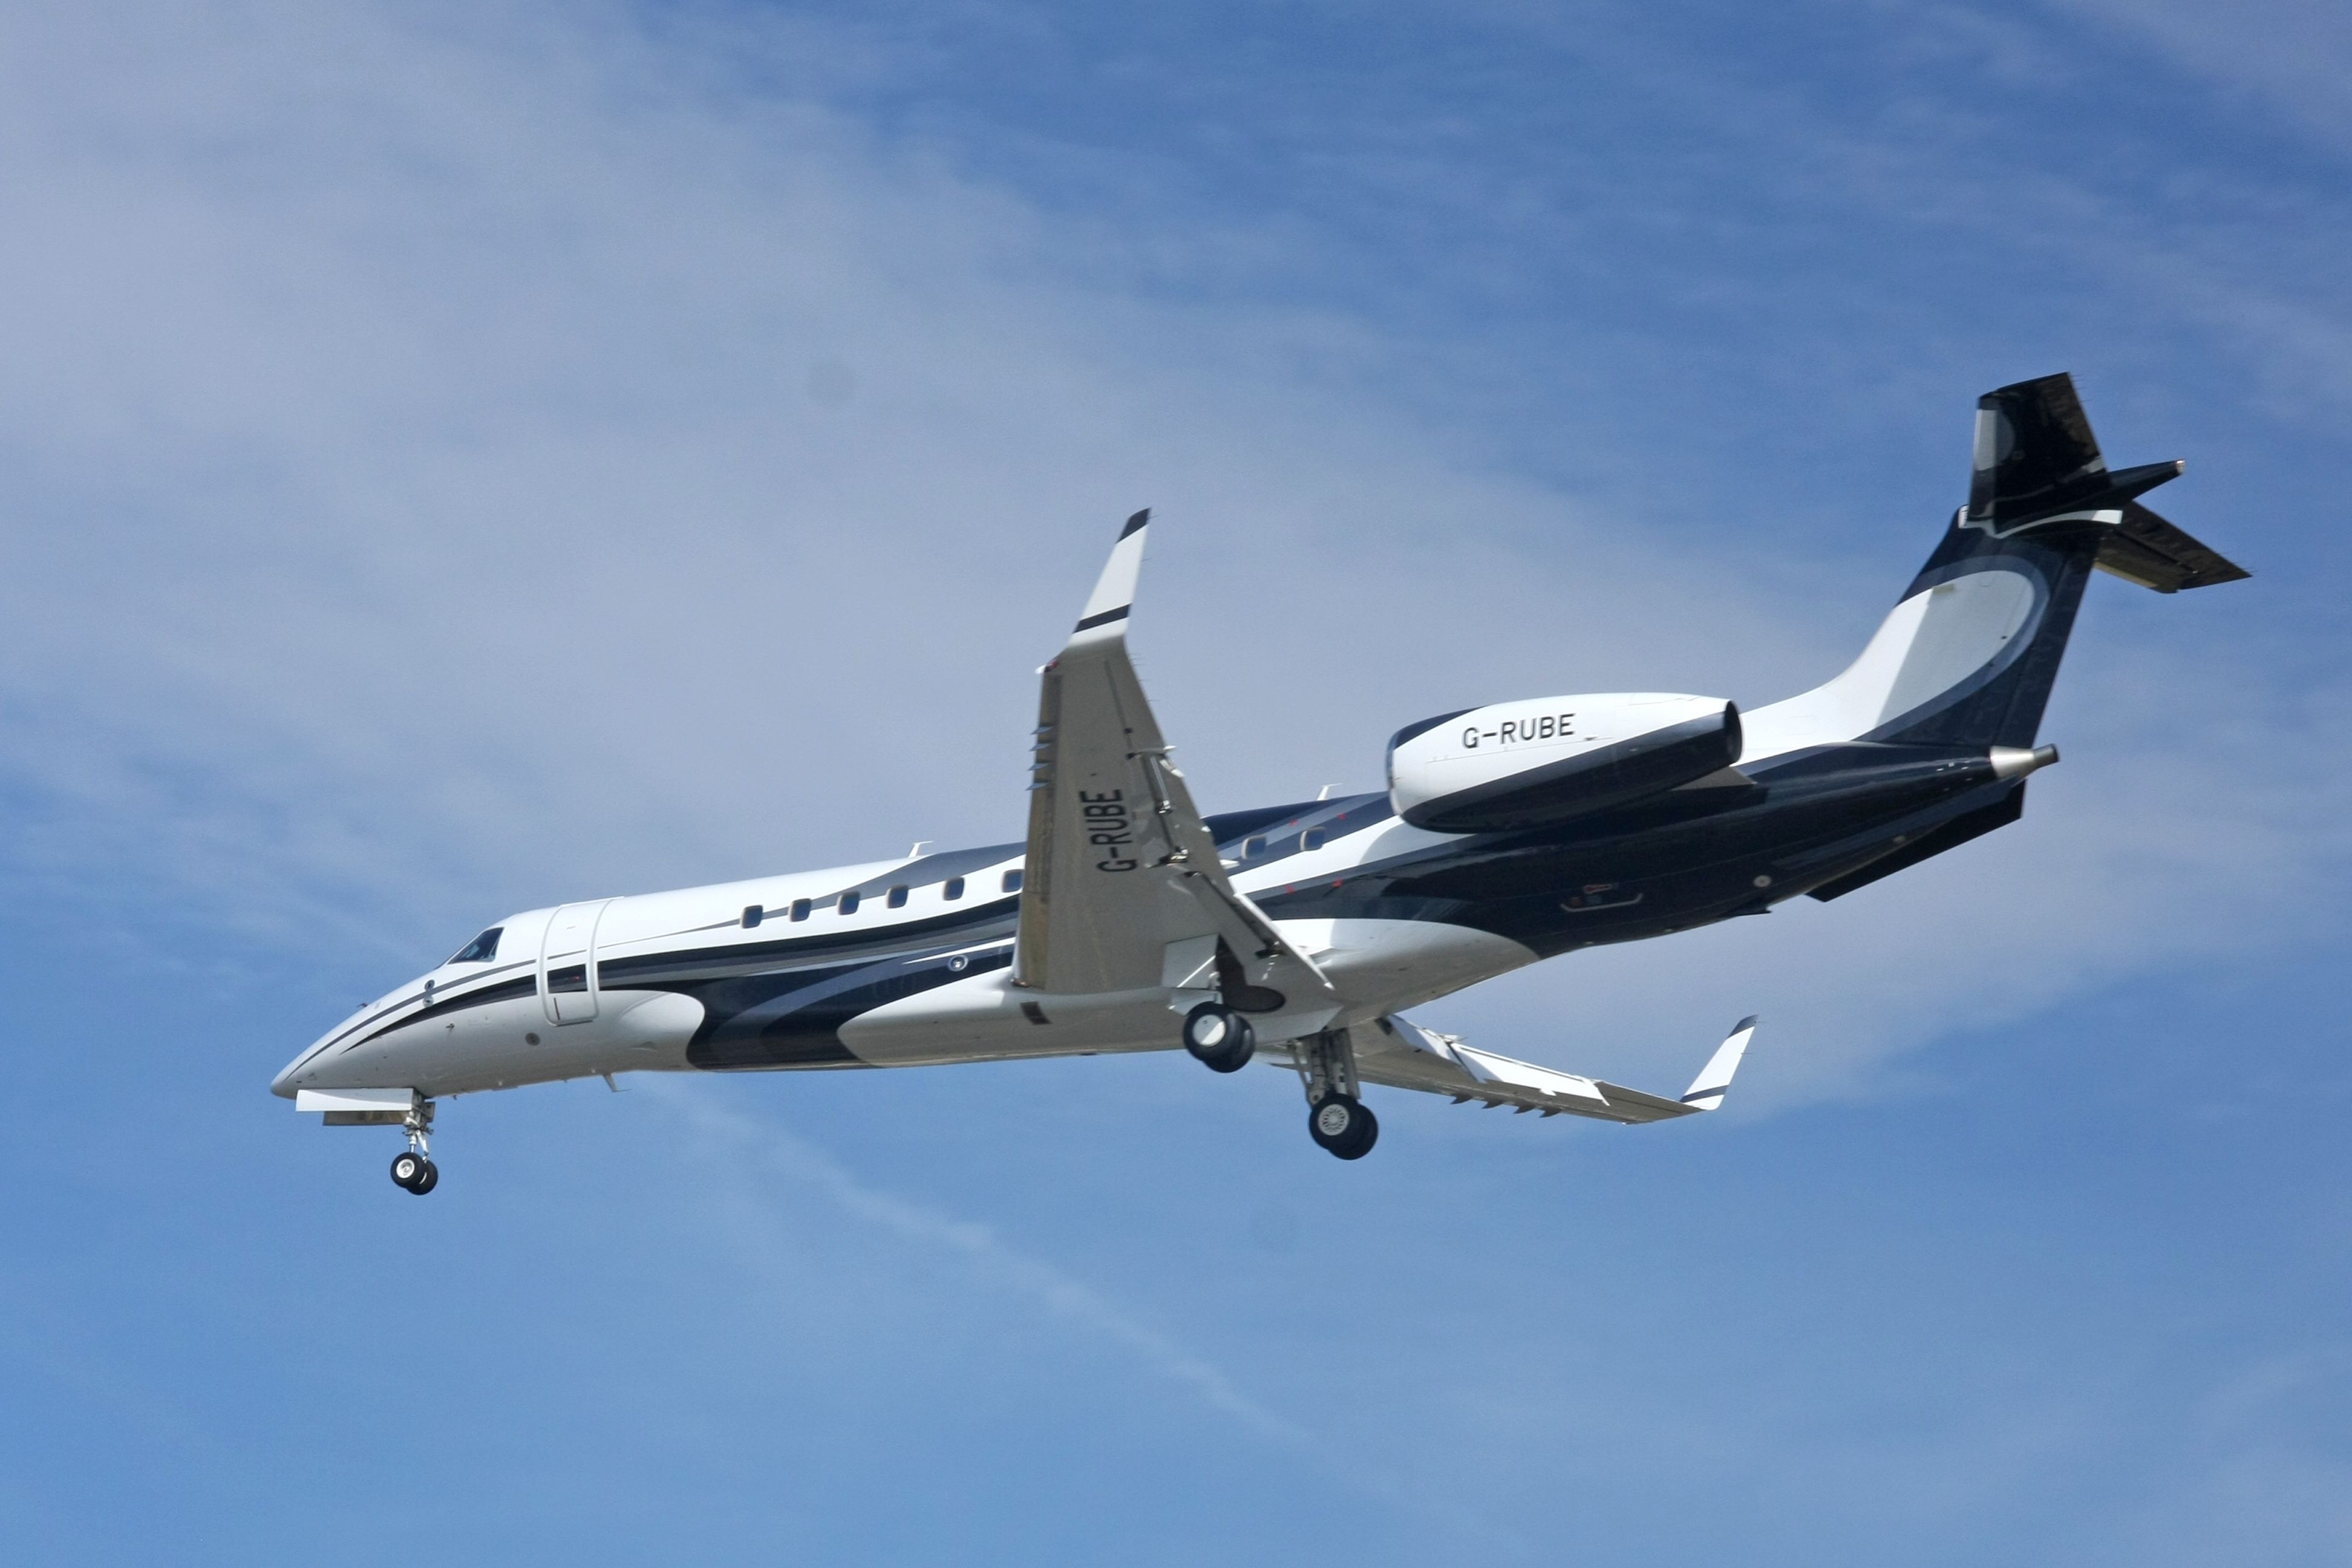 An Embraer Legacy 600 flying in the sky.